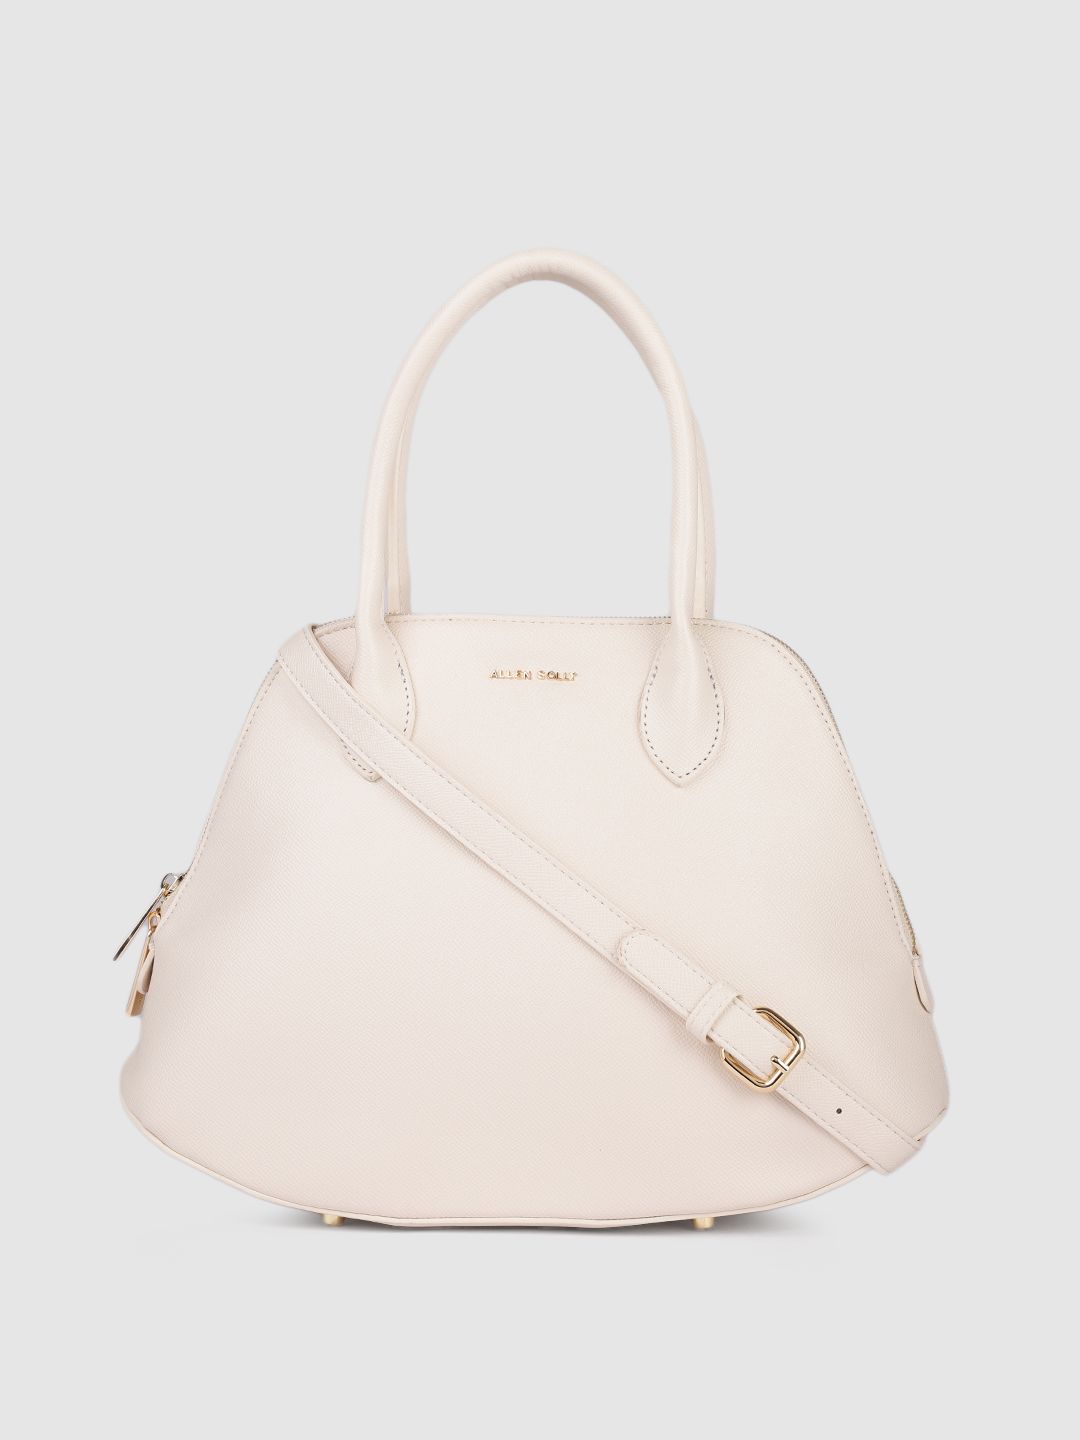 Allen Solly Nude-Coloured Solid Structured Handheld Bag Price in India